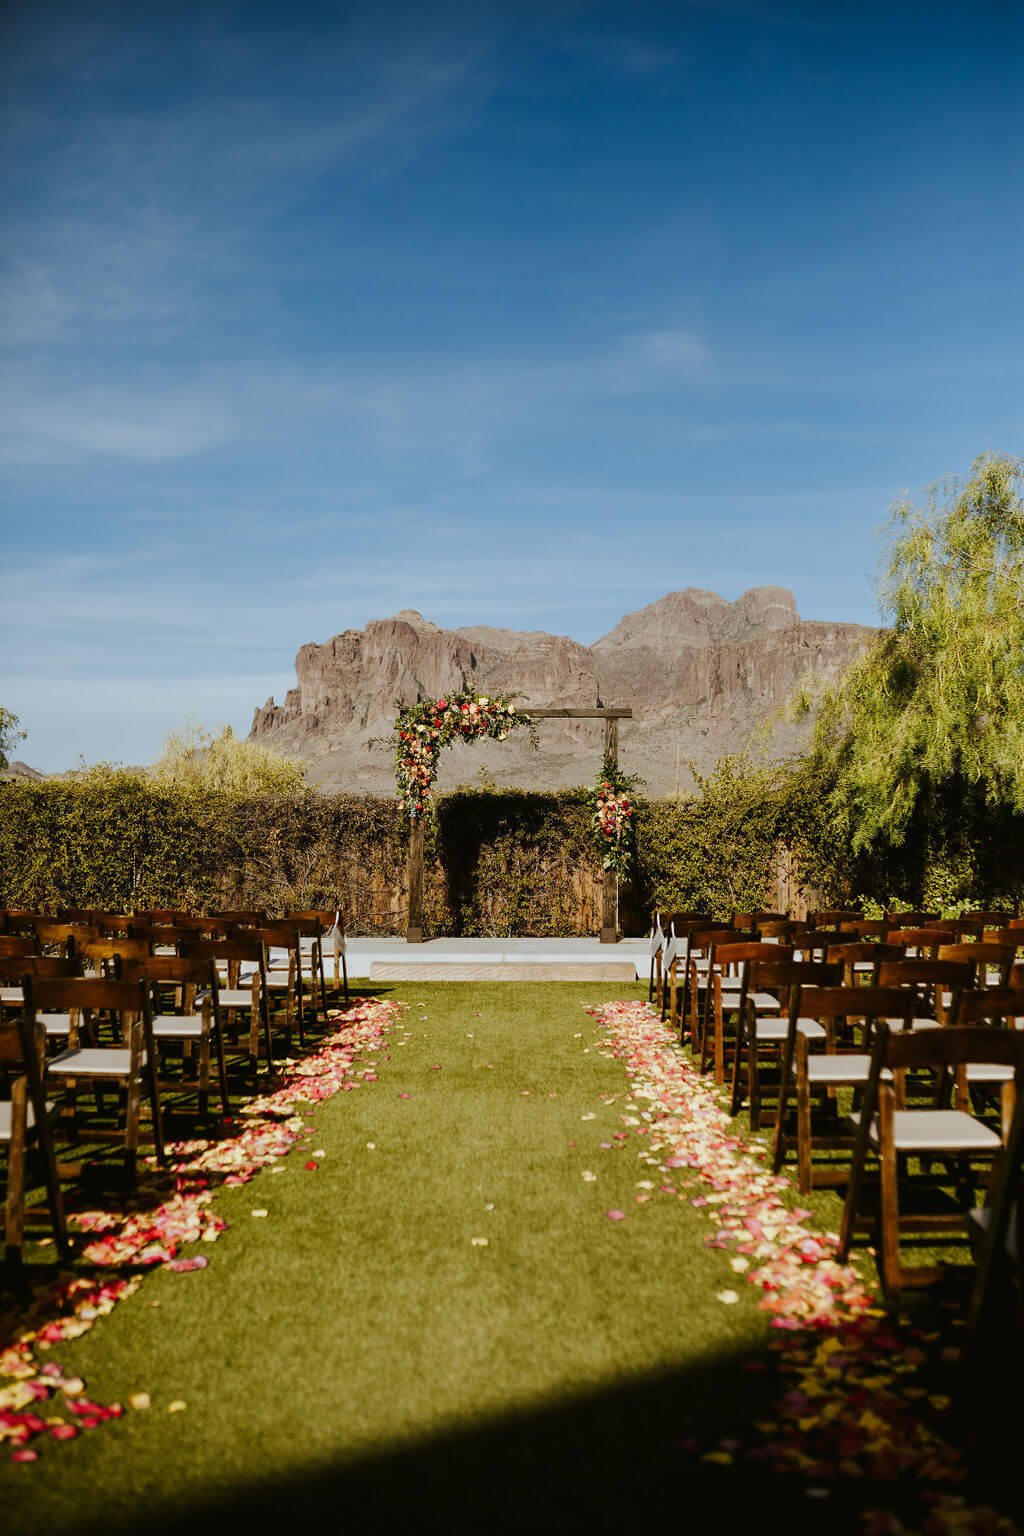 Wedding ceremony lawn with flower petals lining aisle and mountains in the background in Arizona